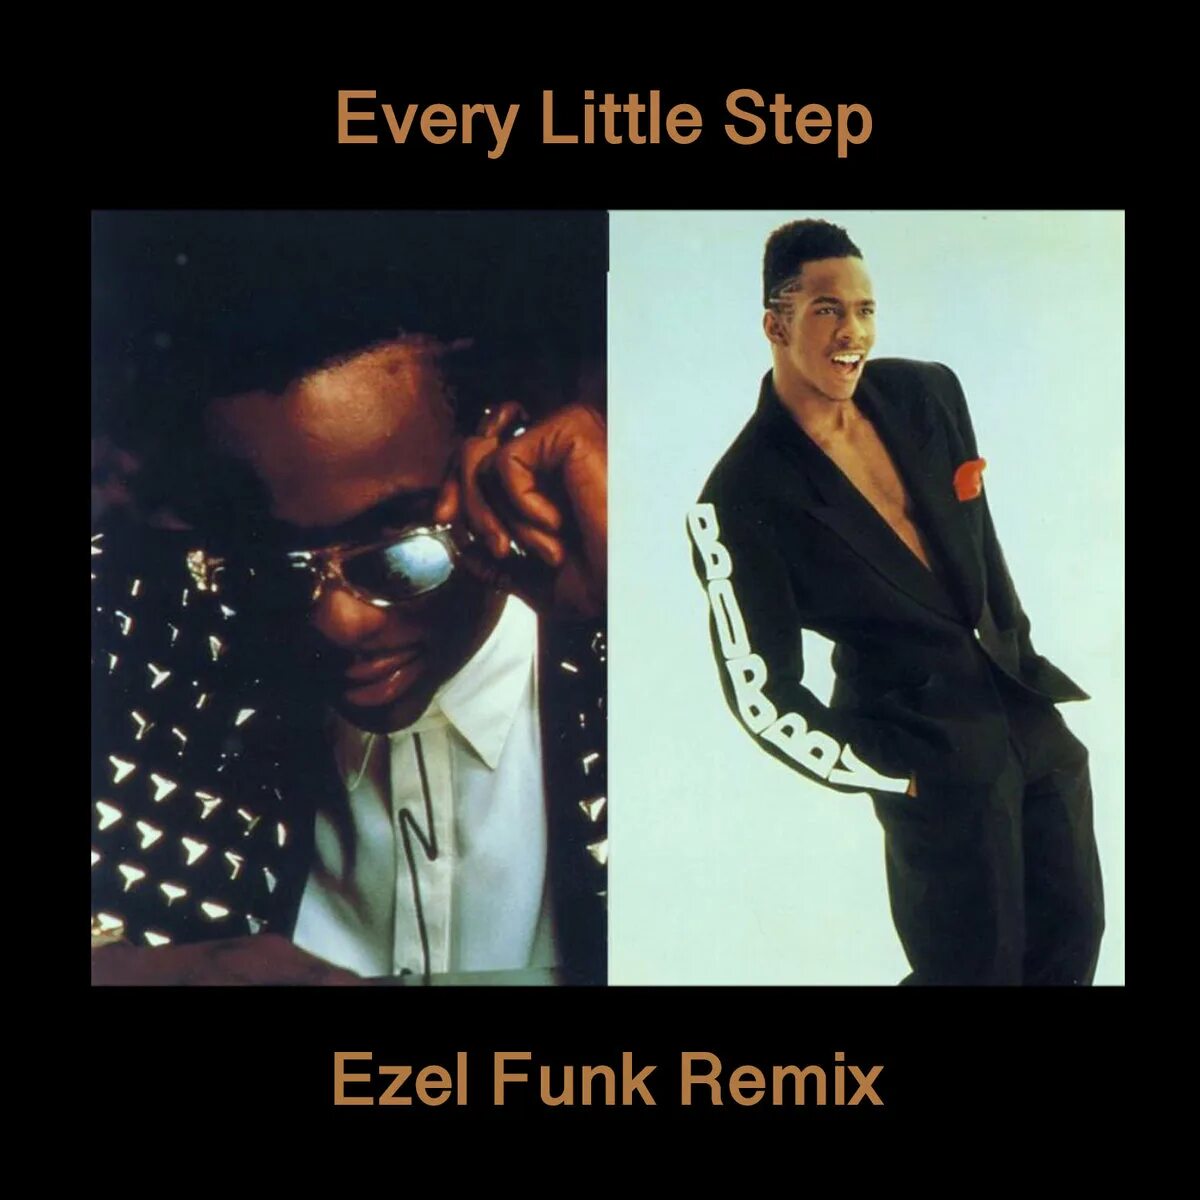 Bobby Brown every little Step. Every little Step Бобби Браун. Бобби Браун New Edition. Bobby Brown - every little Step.mp3. Step mp3